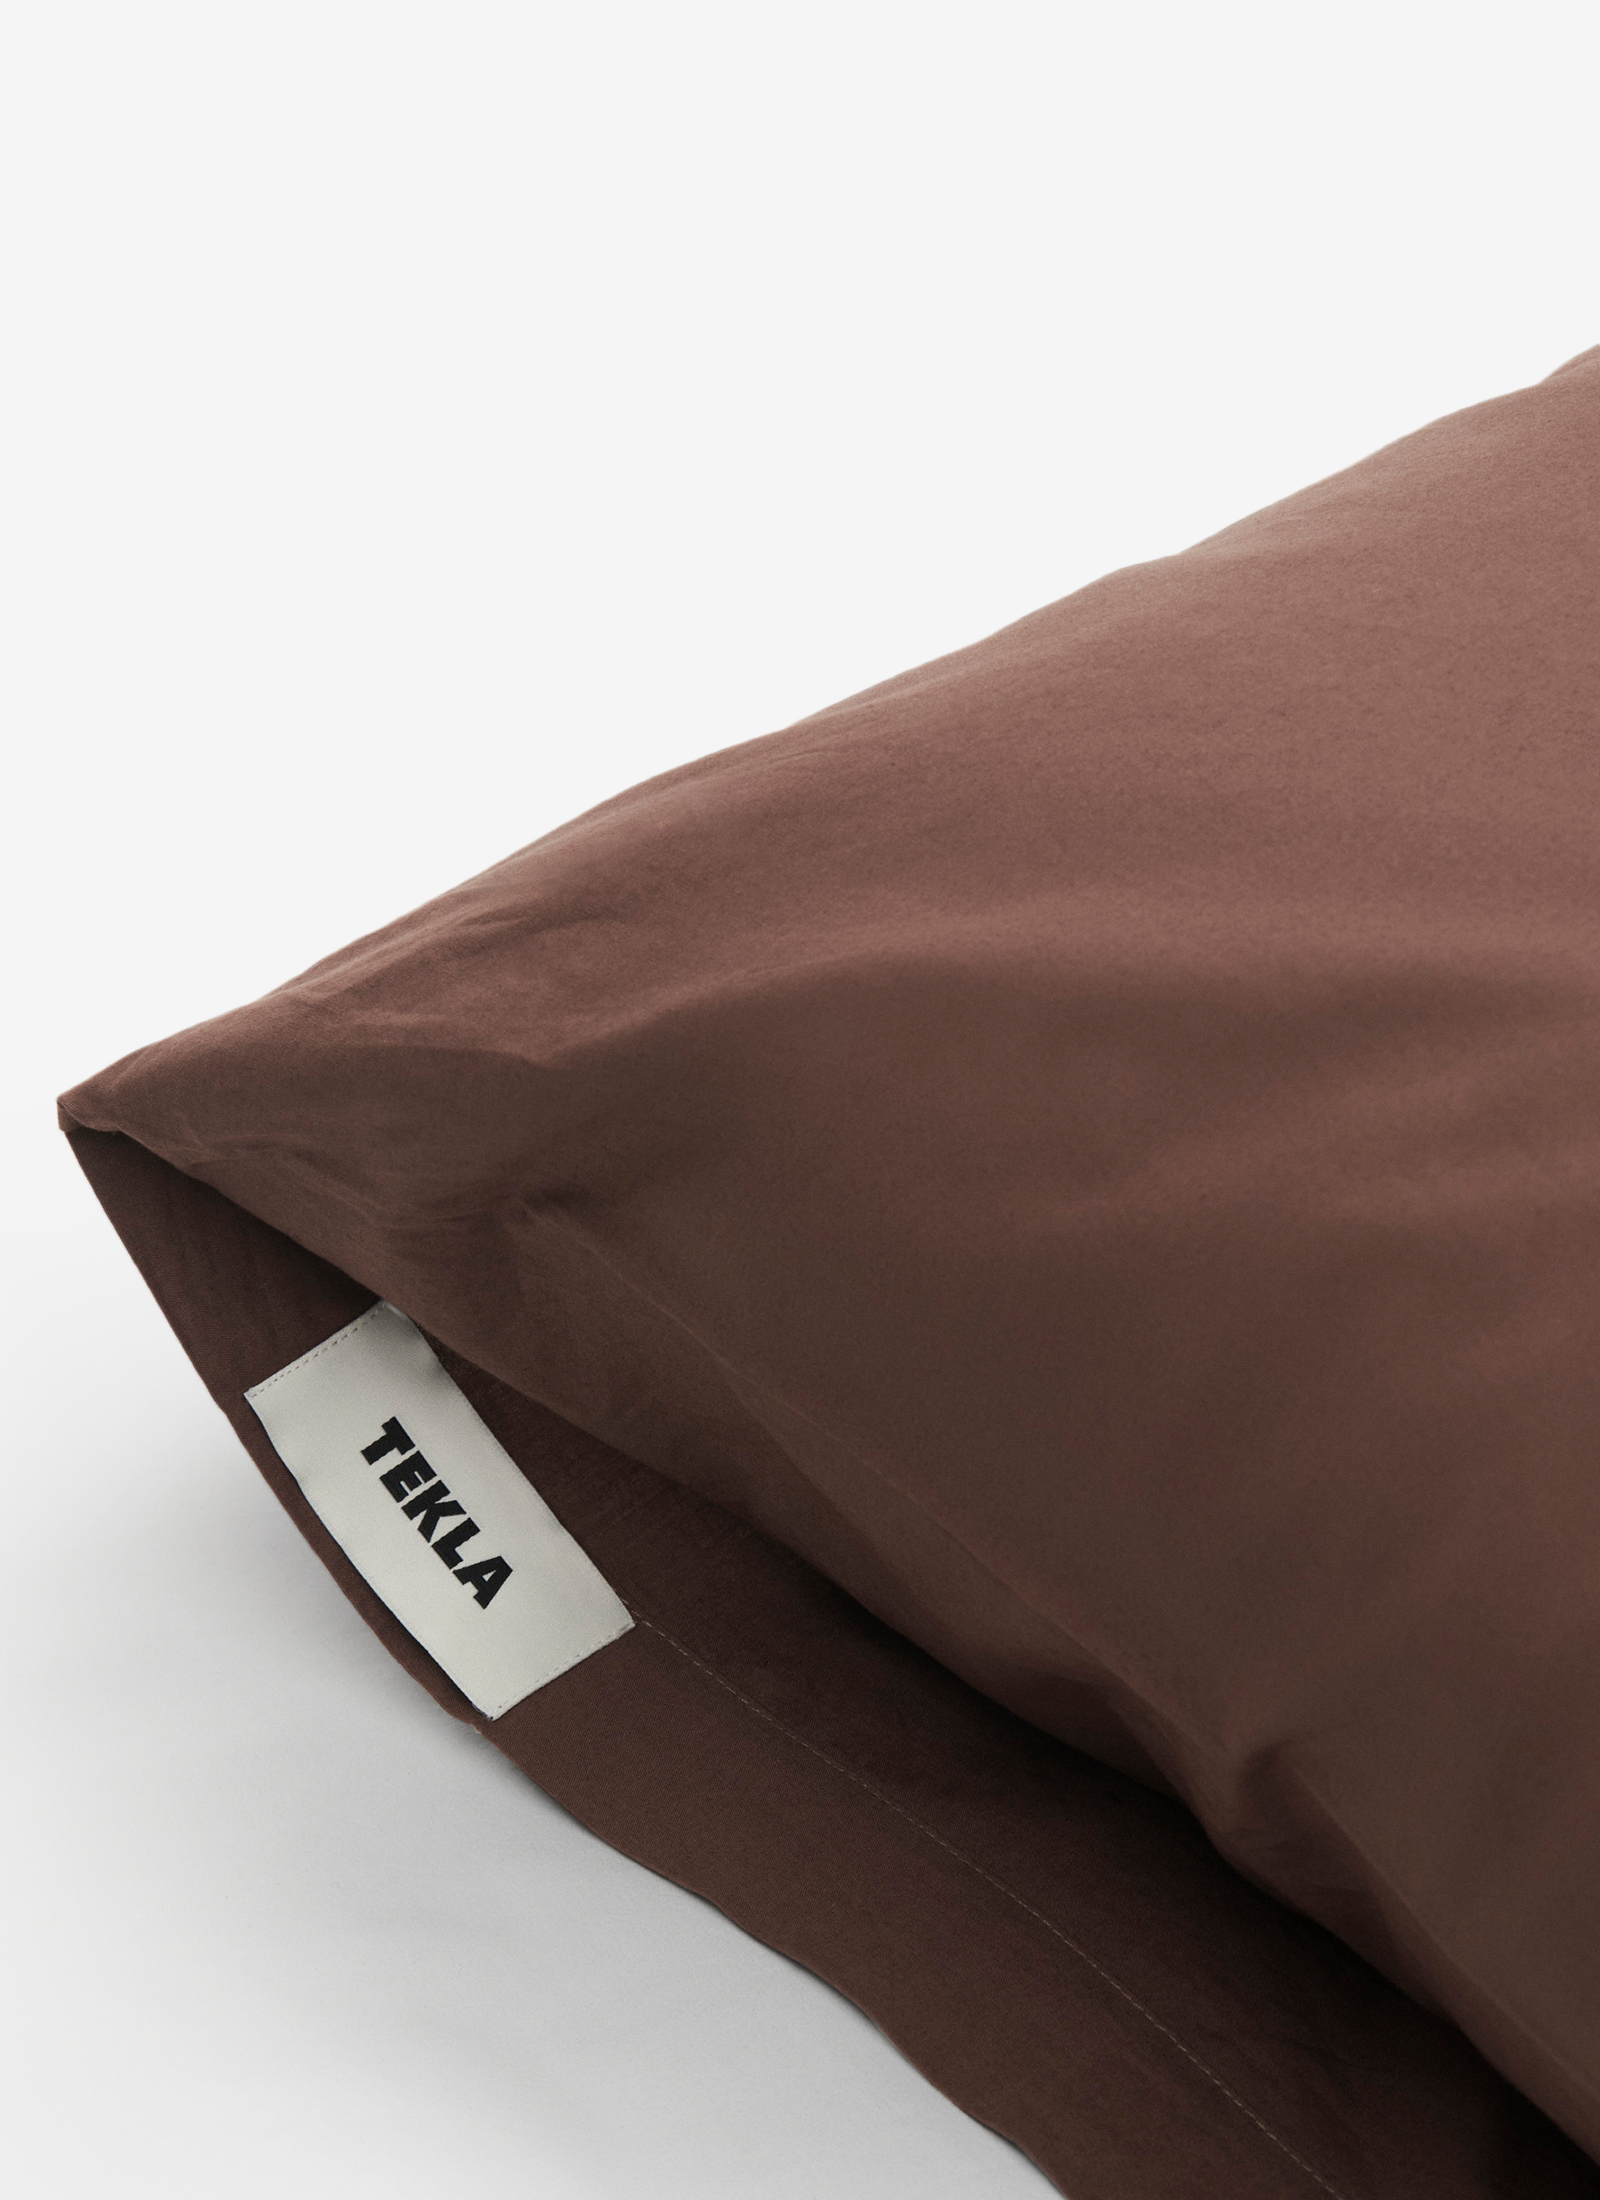 Pillowcases in Cocoa Brown - Pair